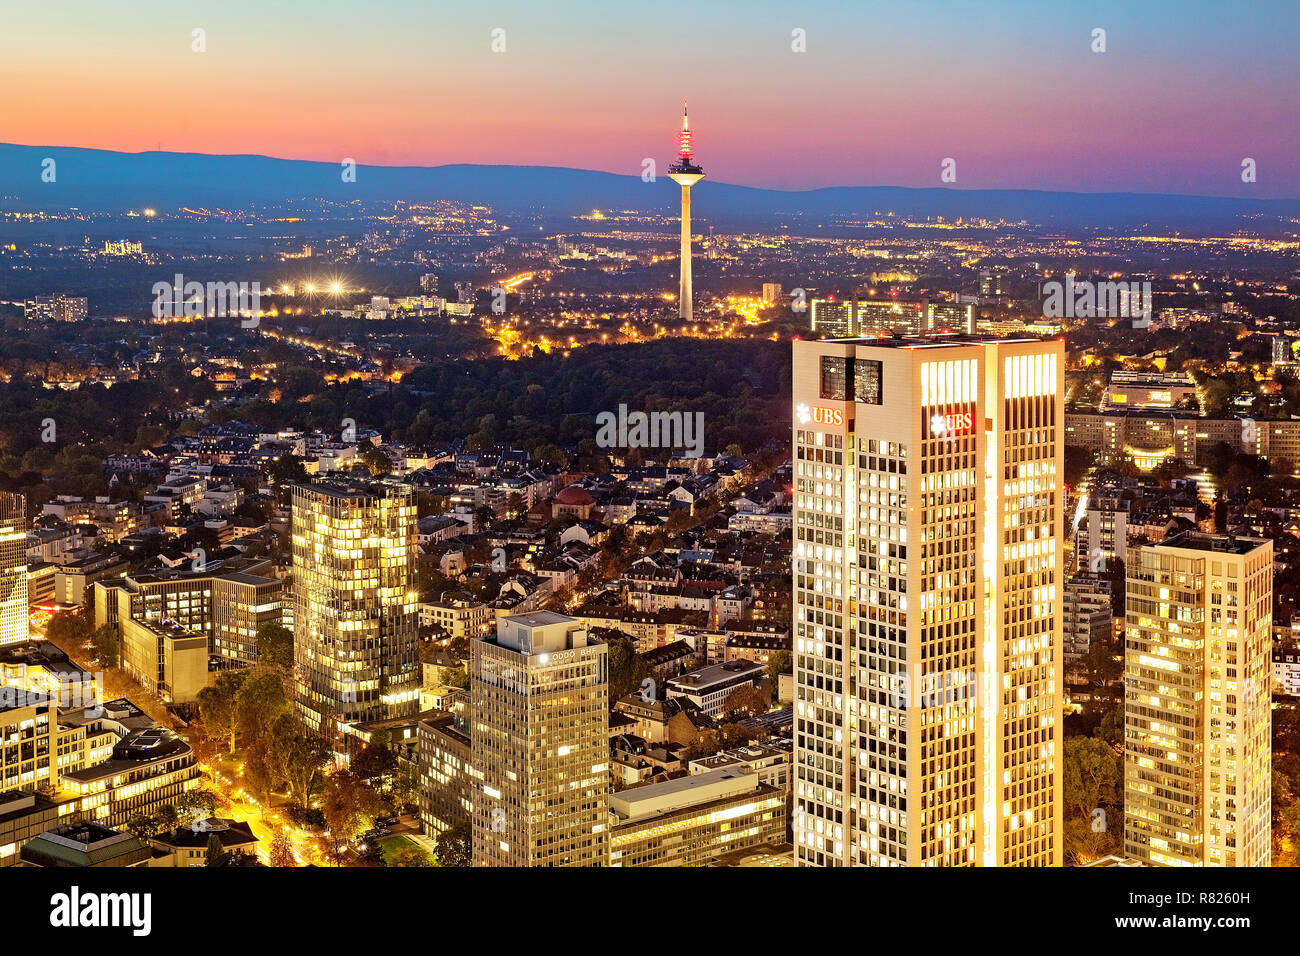 City view with television tower at dusk, seen from Main Tower, Frankfurt am Main, Hesse, Germany Stock Photo